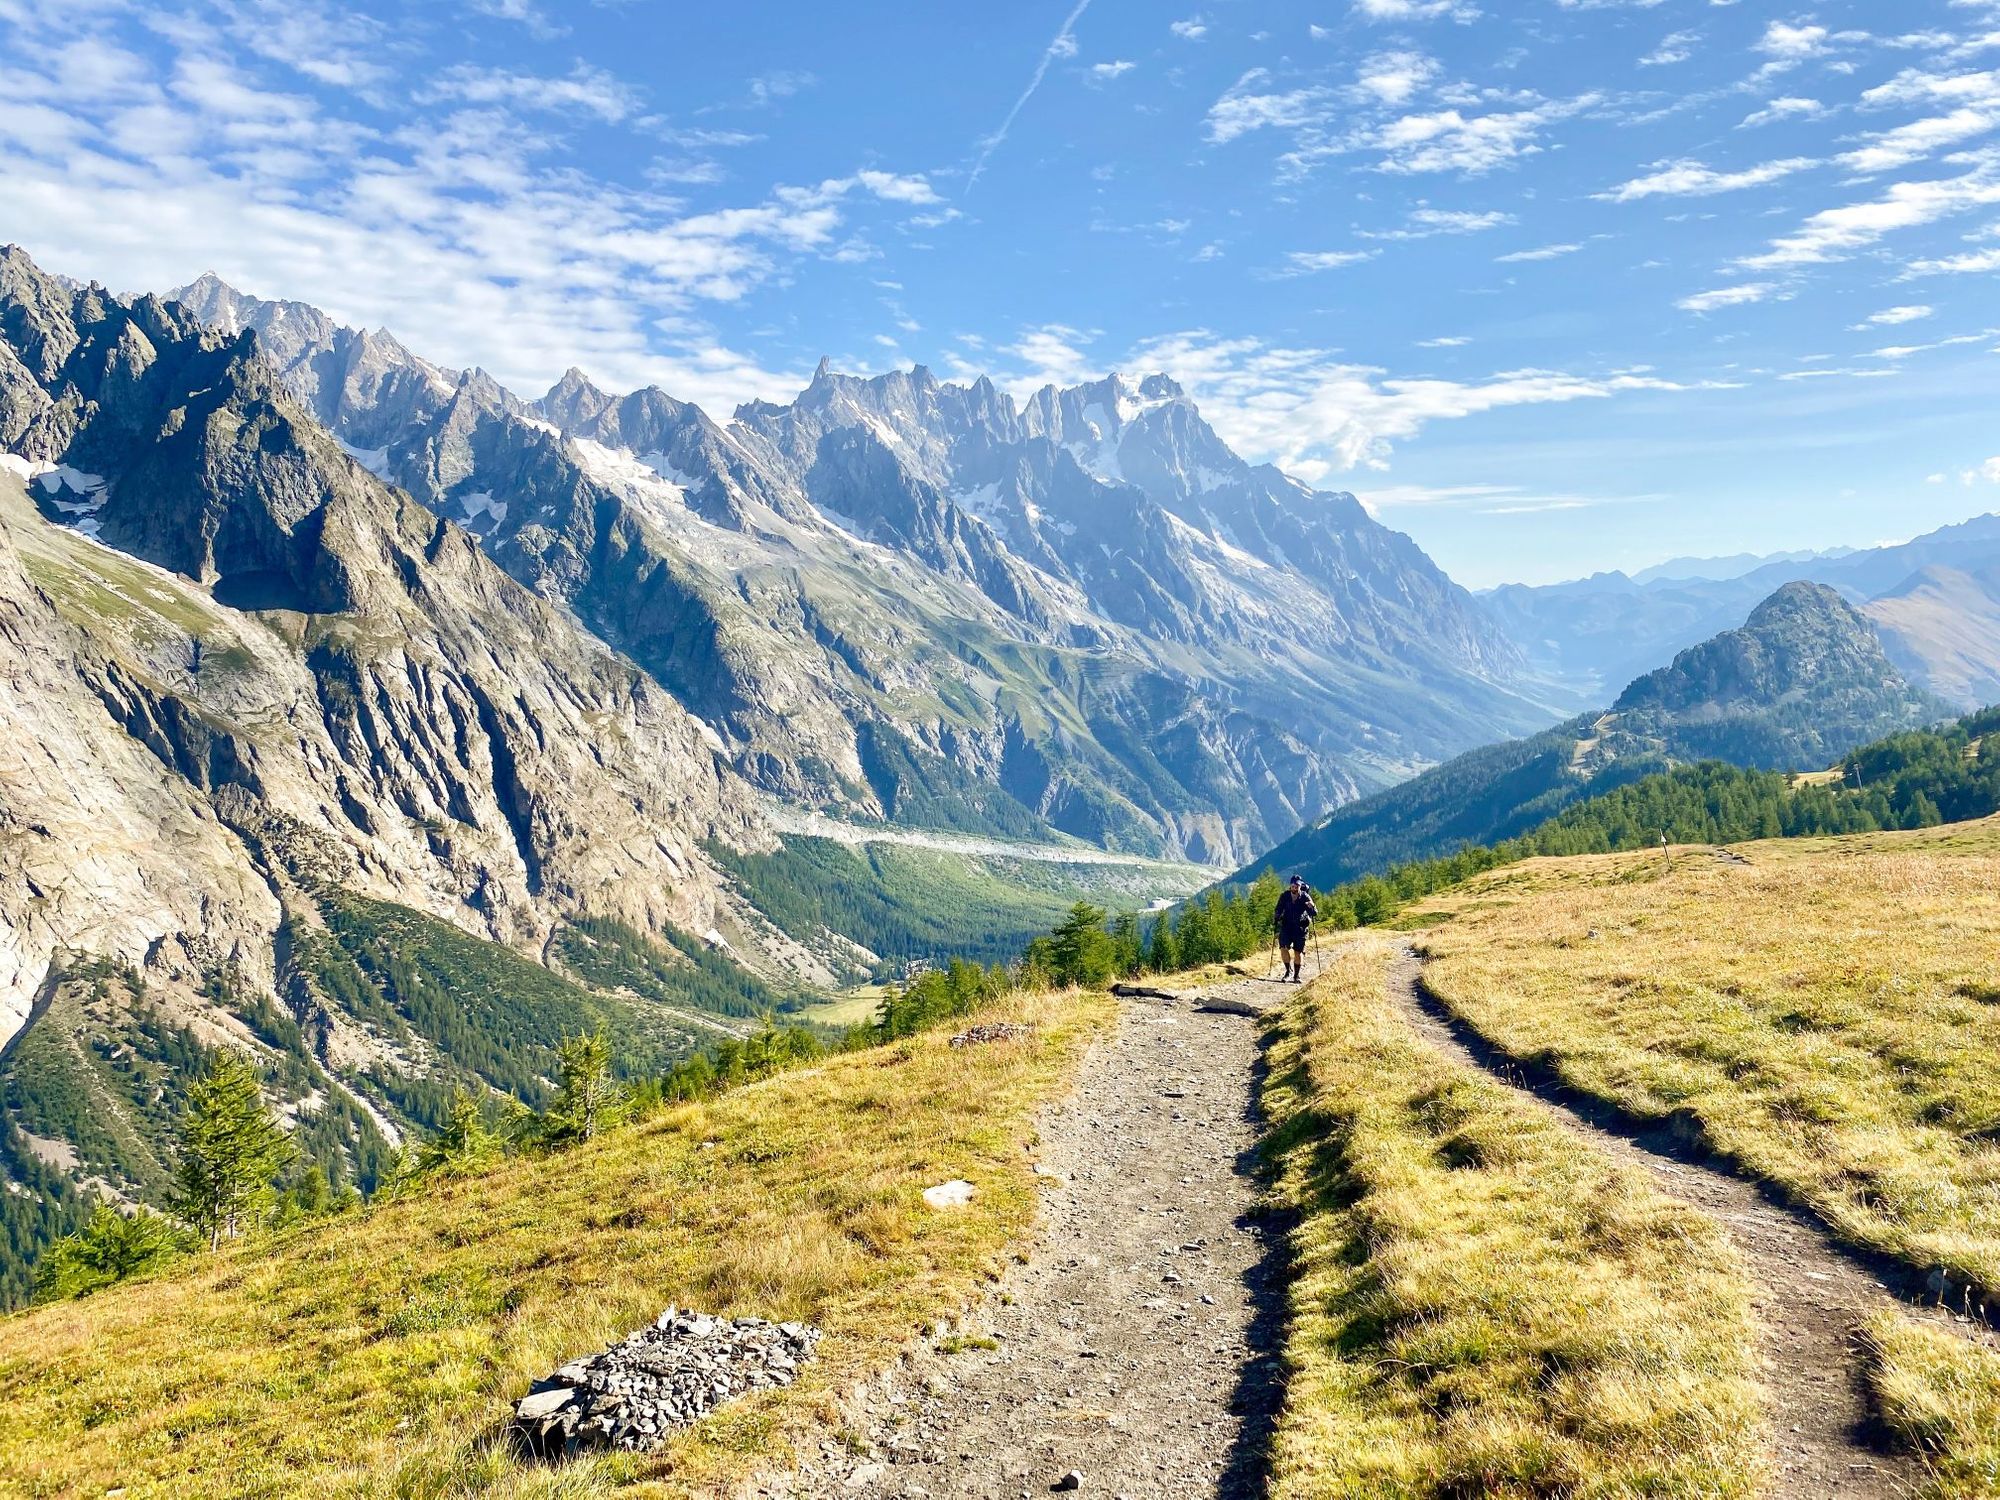 Tour du Mont Blanc Refuges: Everything You Need to Know